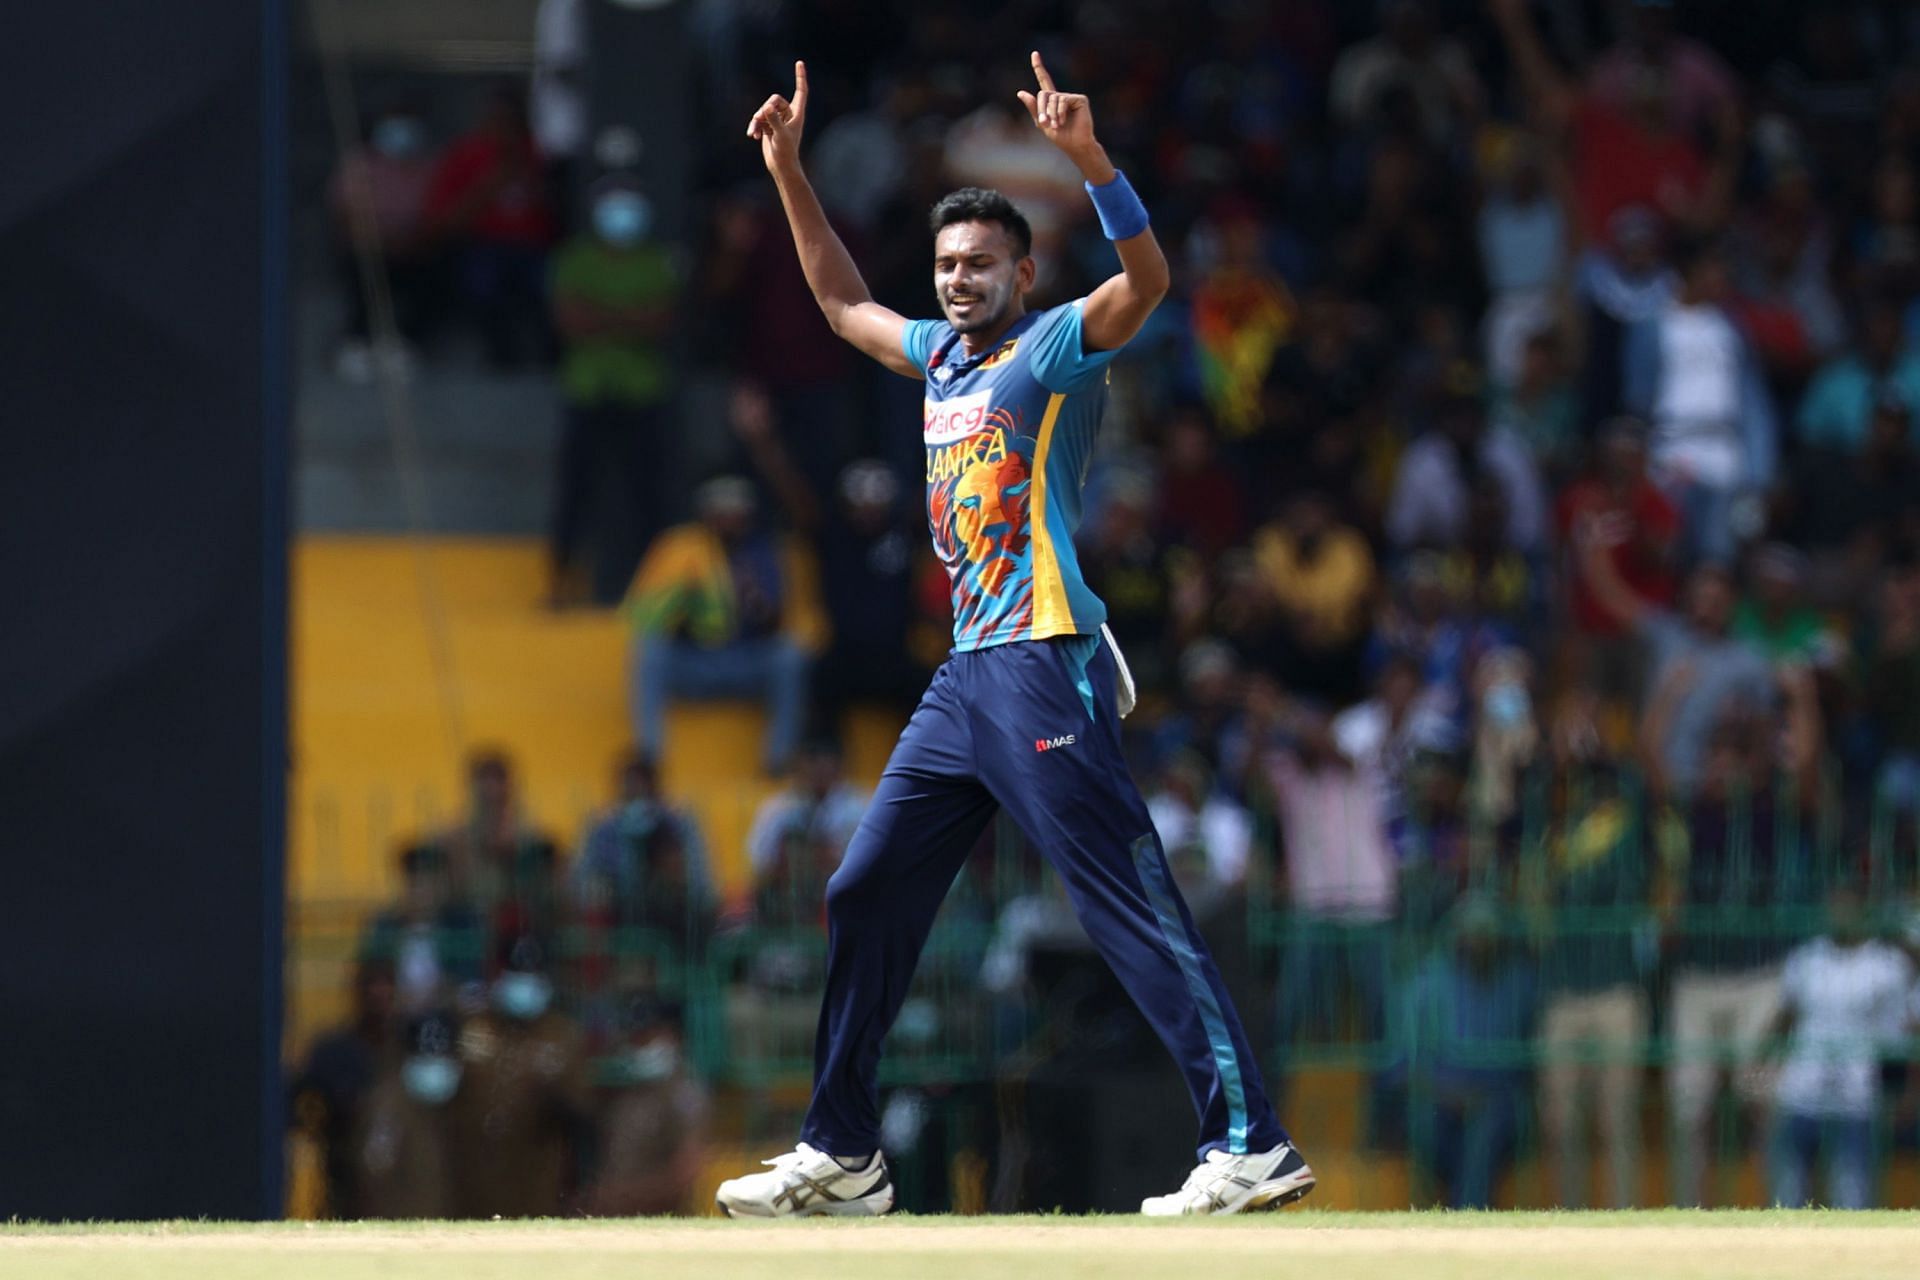 Dushmantha Chameera was ruled out of the tournament after suffering a calf injury.